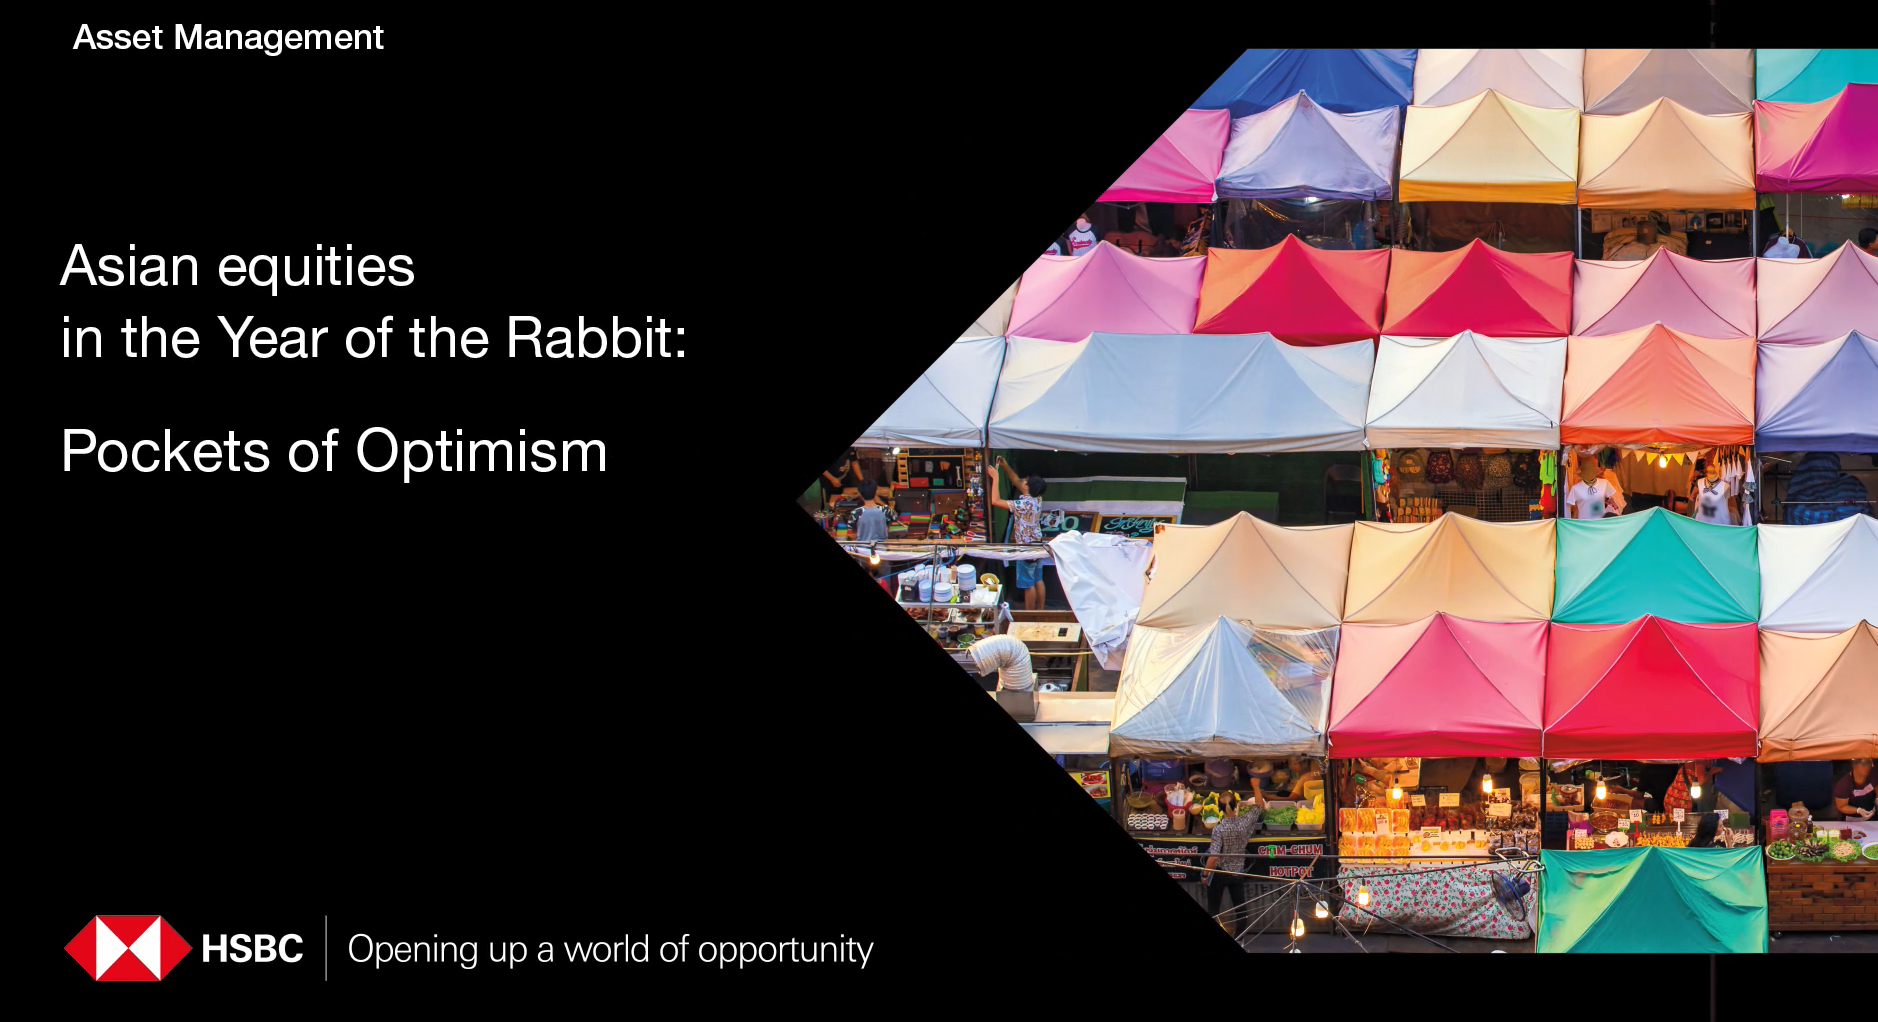 Asian equities in the Year of the Rabbit: Pockets of optimism